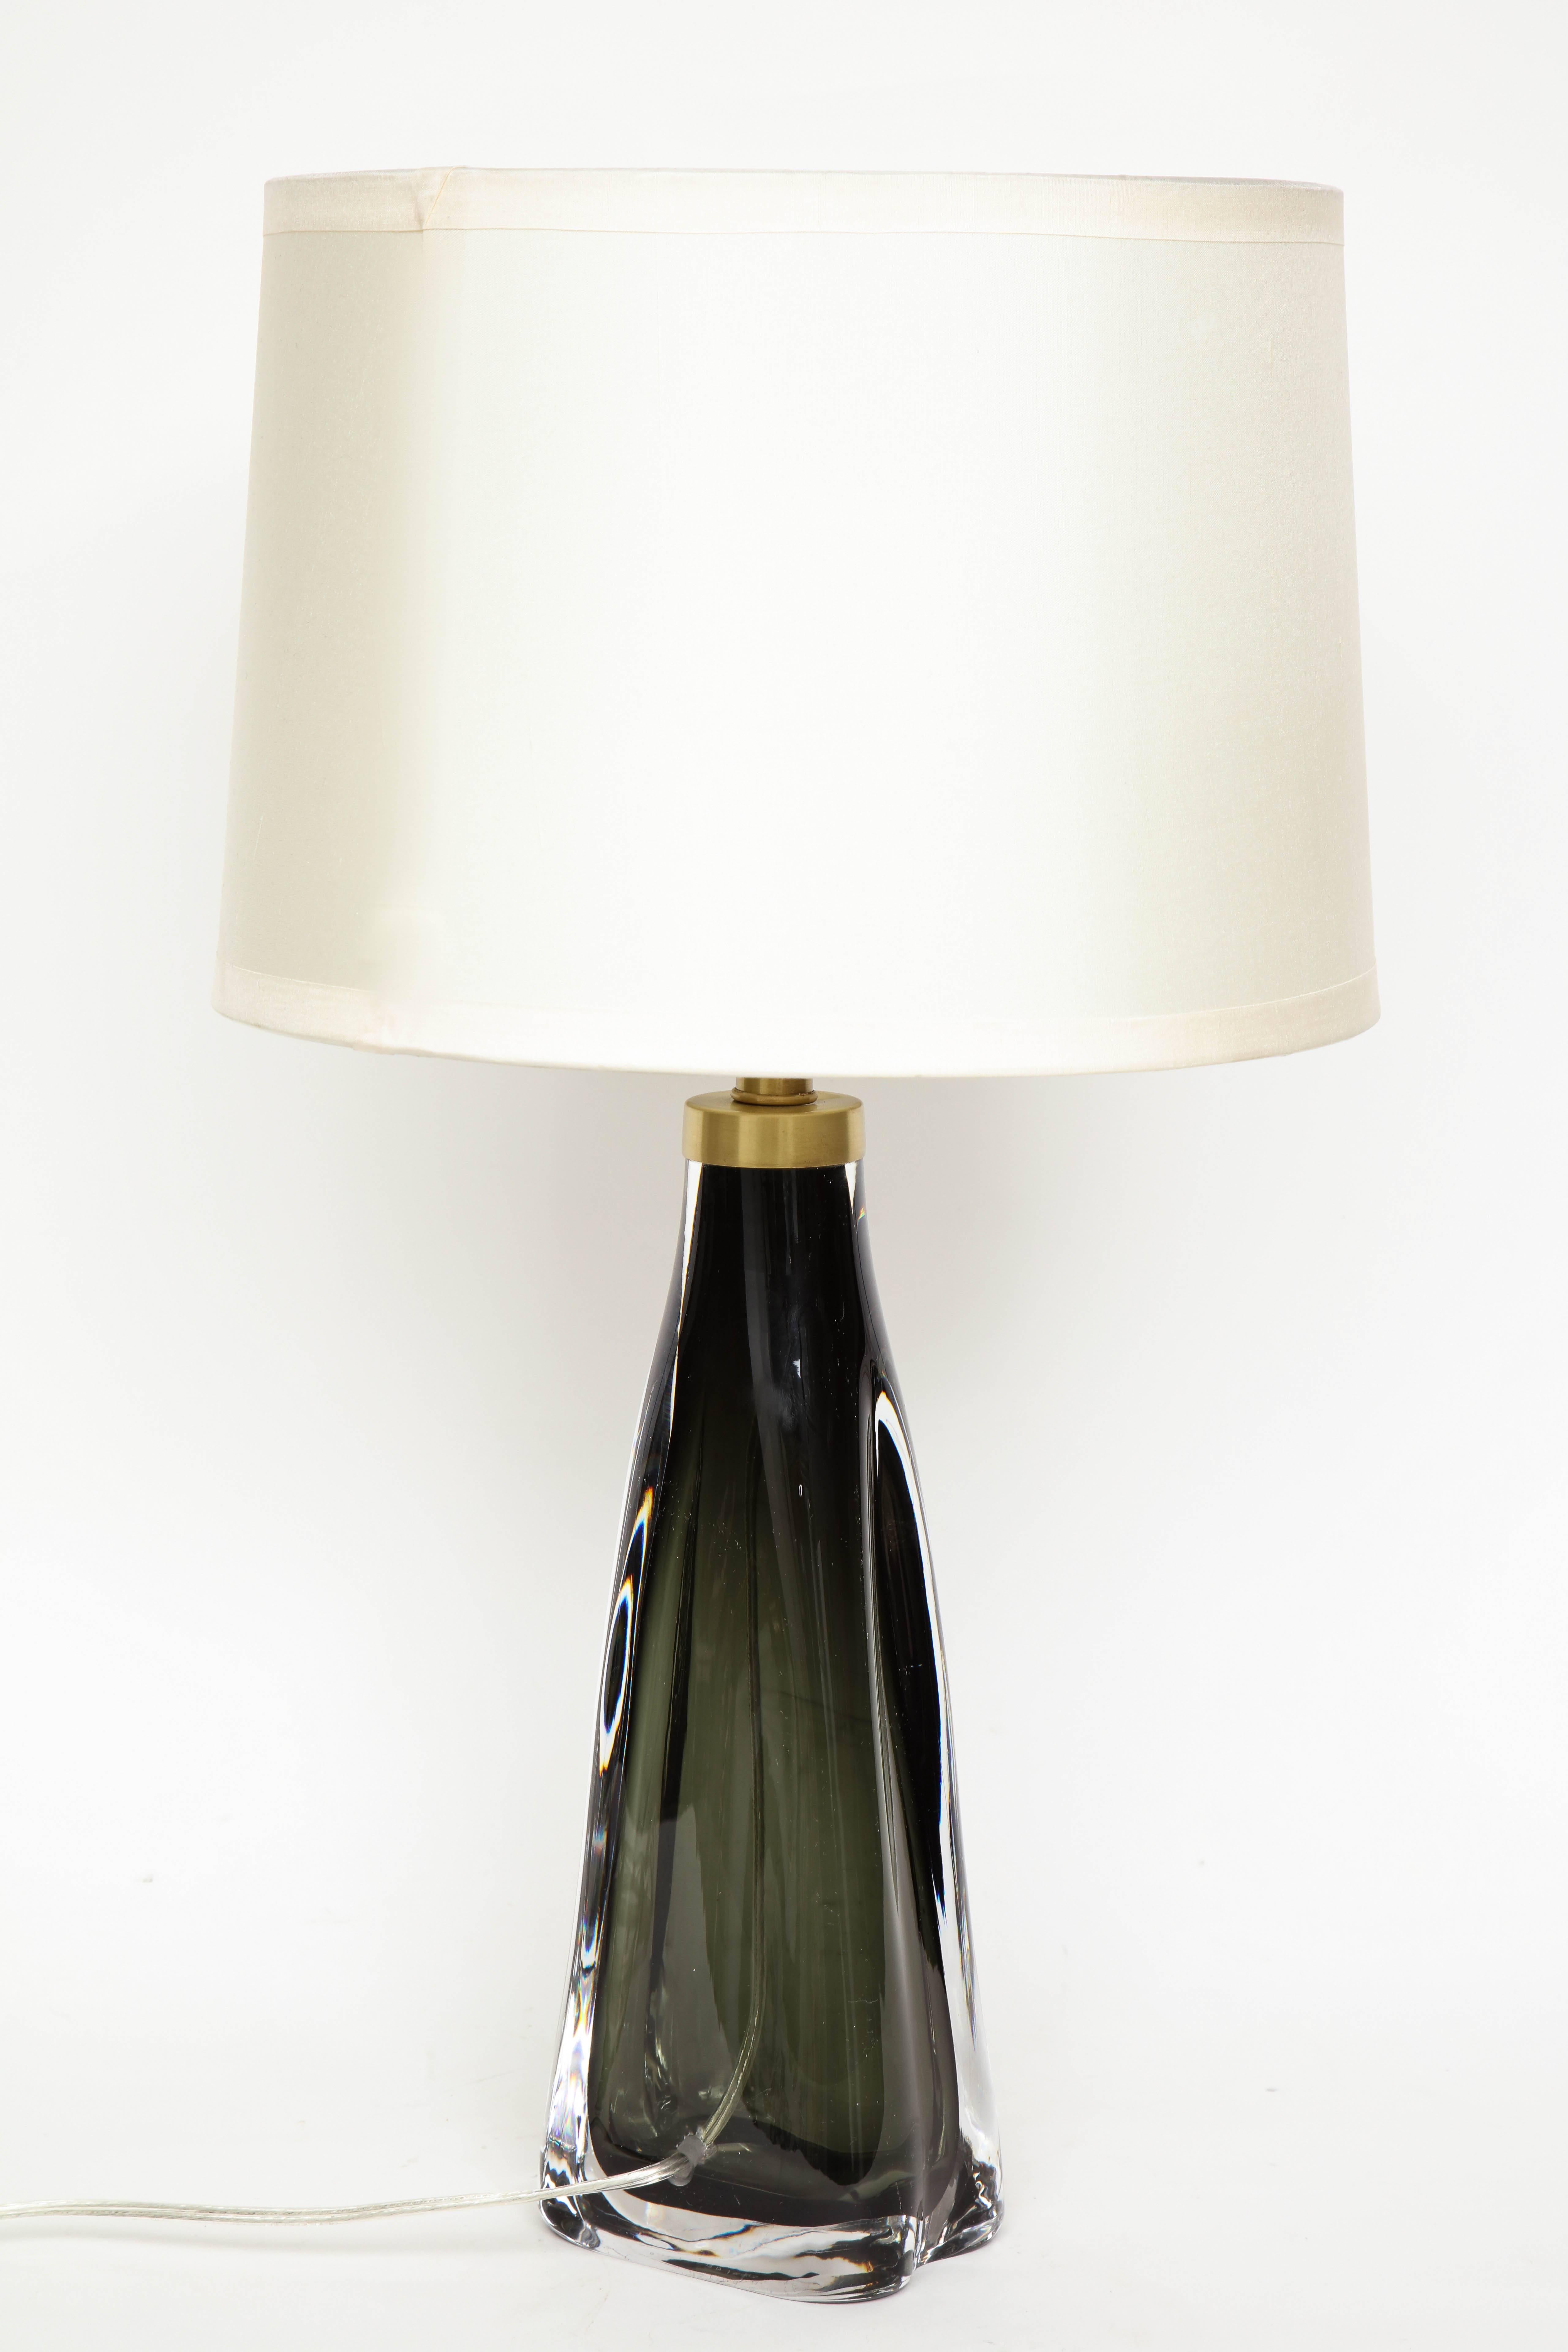 Nils Landberg/Orrefors Dark Bottle Green Lamps In Excellent Condition For Sale In New York, NY